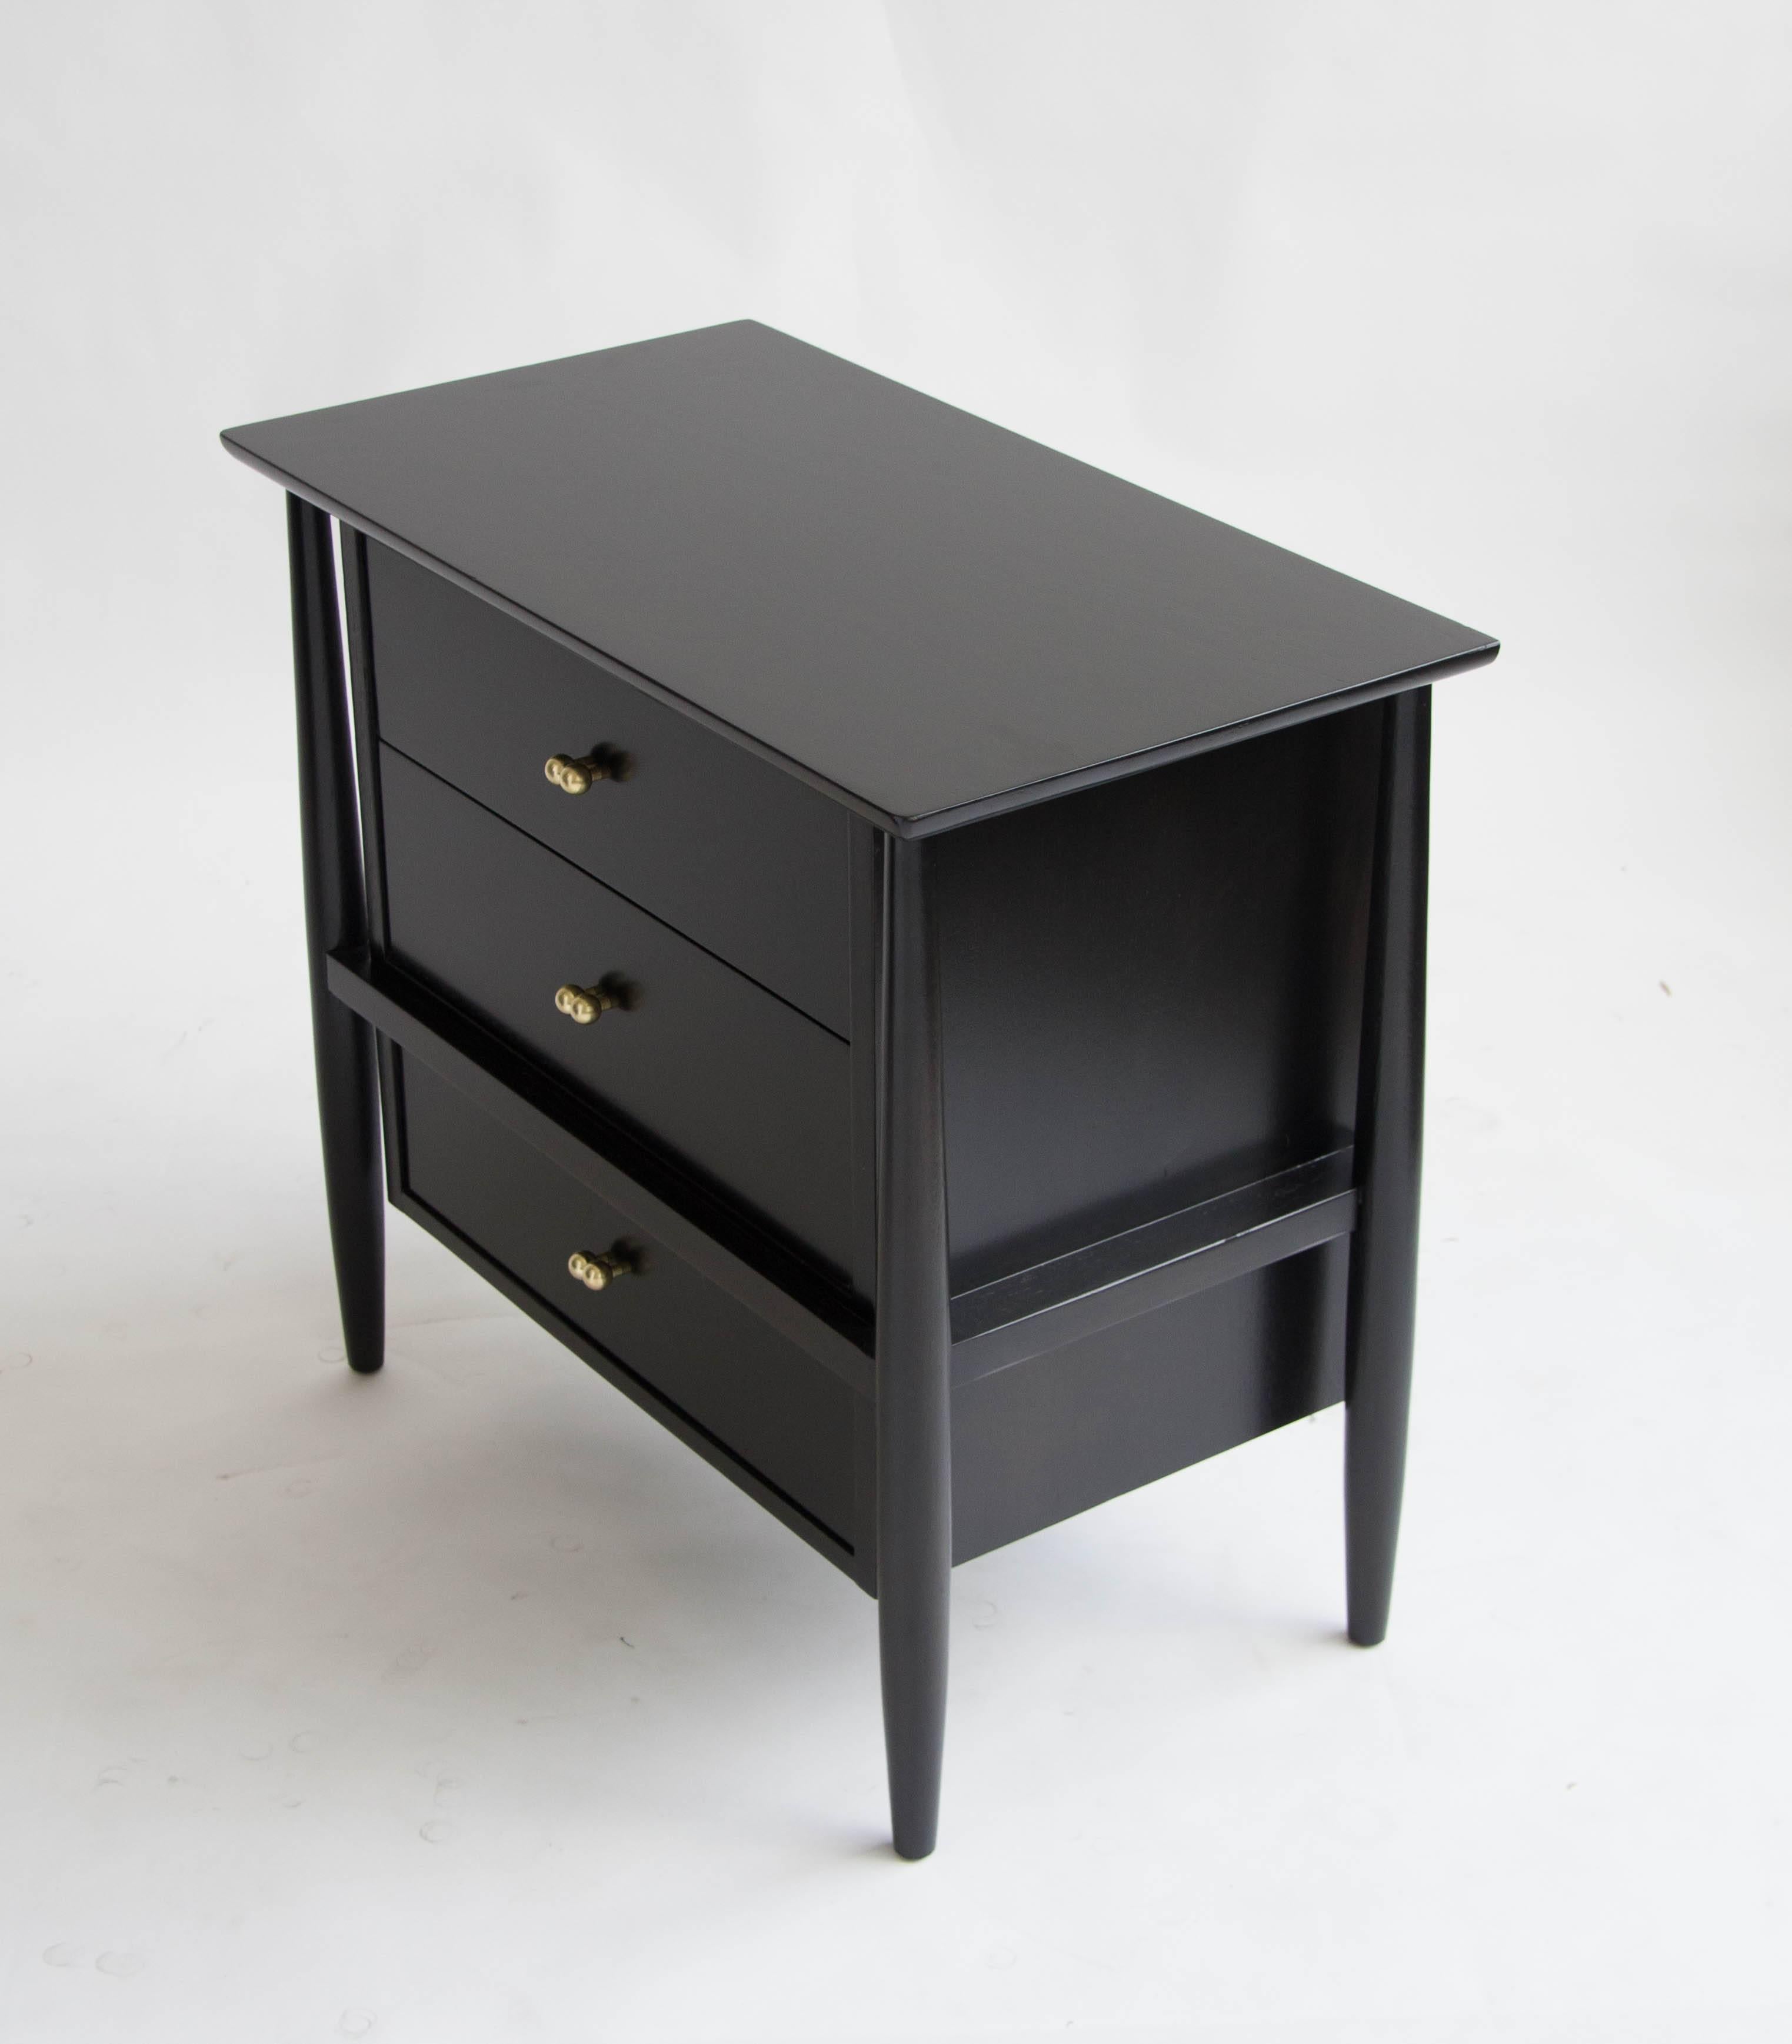 Mid-20th Century Pair of Ebonized Nightstands with Brass Details by John Stuart for Mt Airy